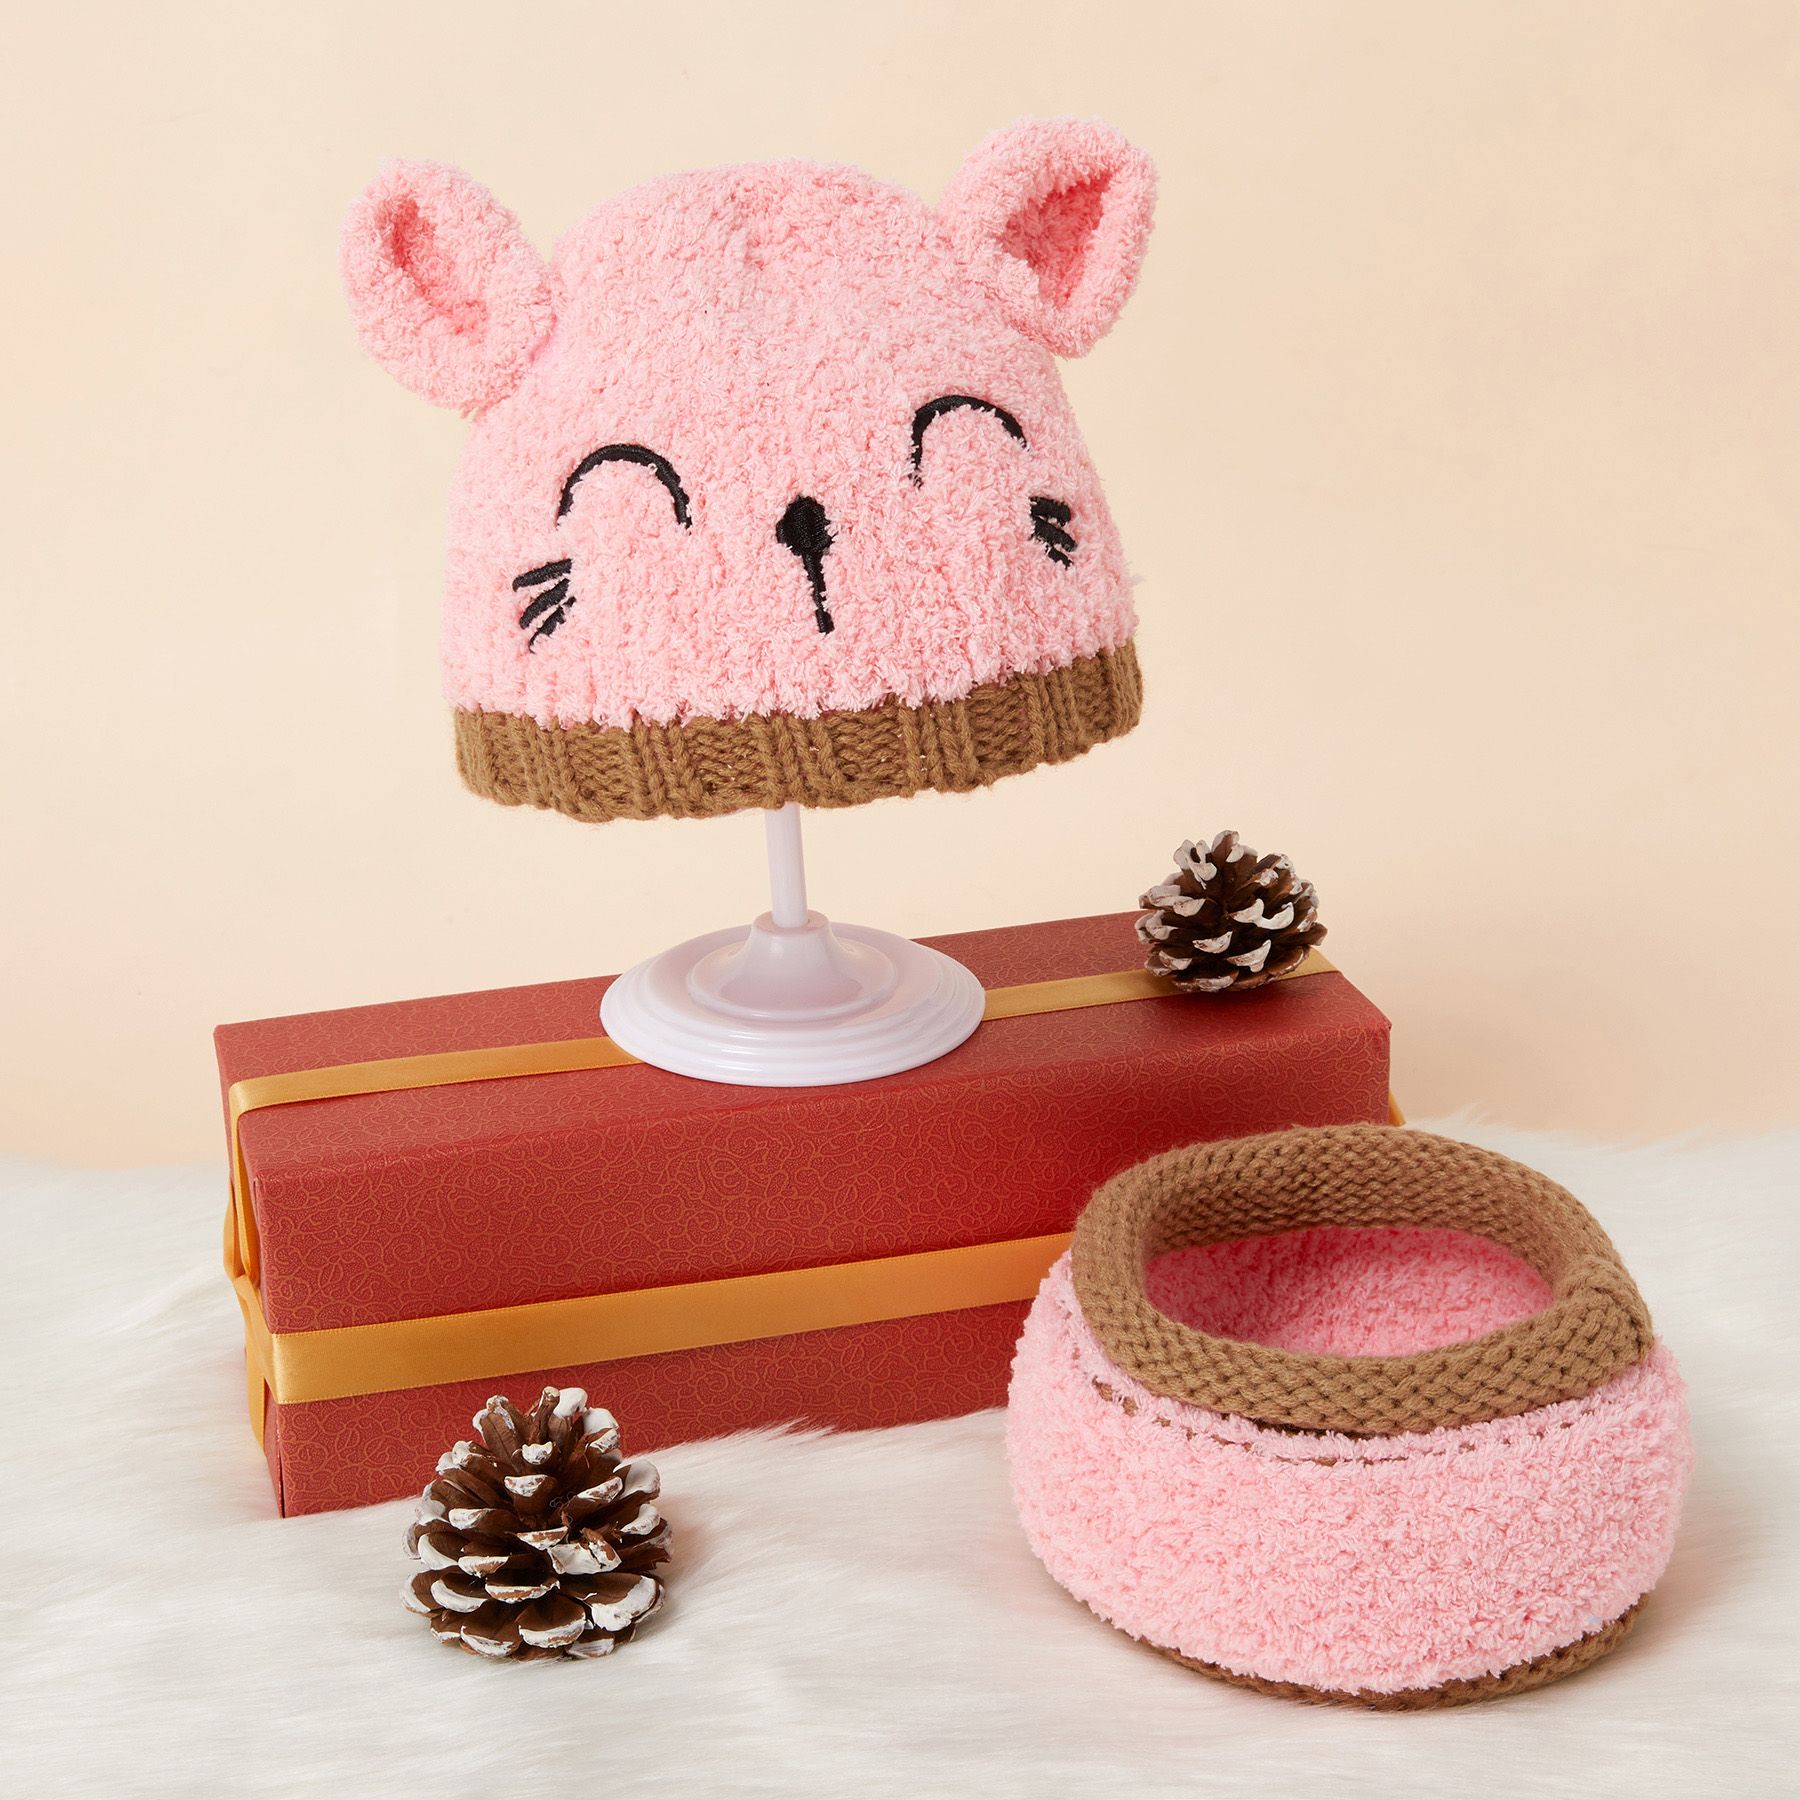 2-piece Baby / Toddler Knitted Animal Design Beanie Hat And Scarf Set